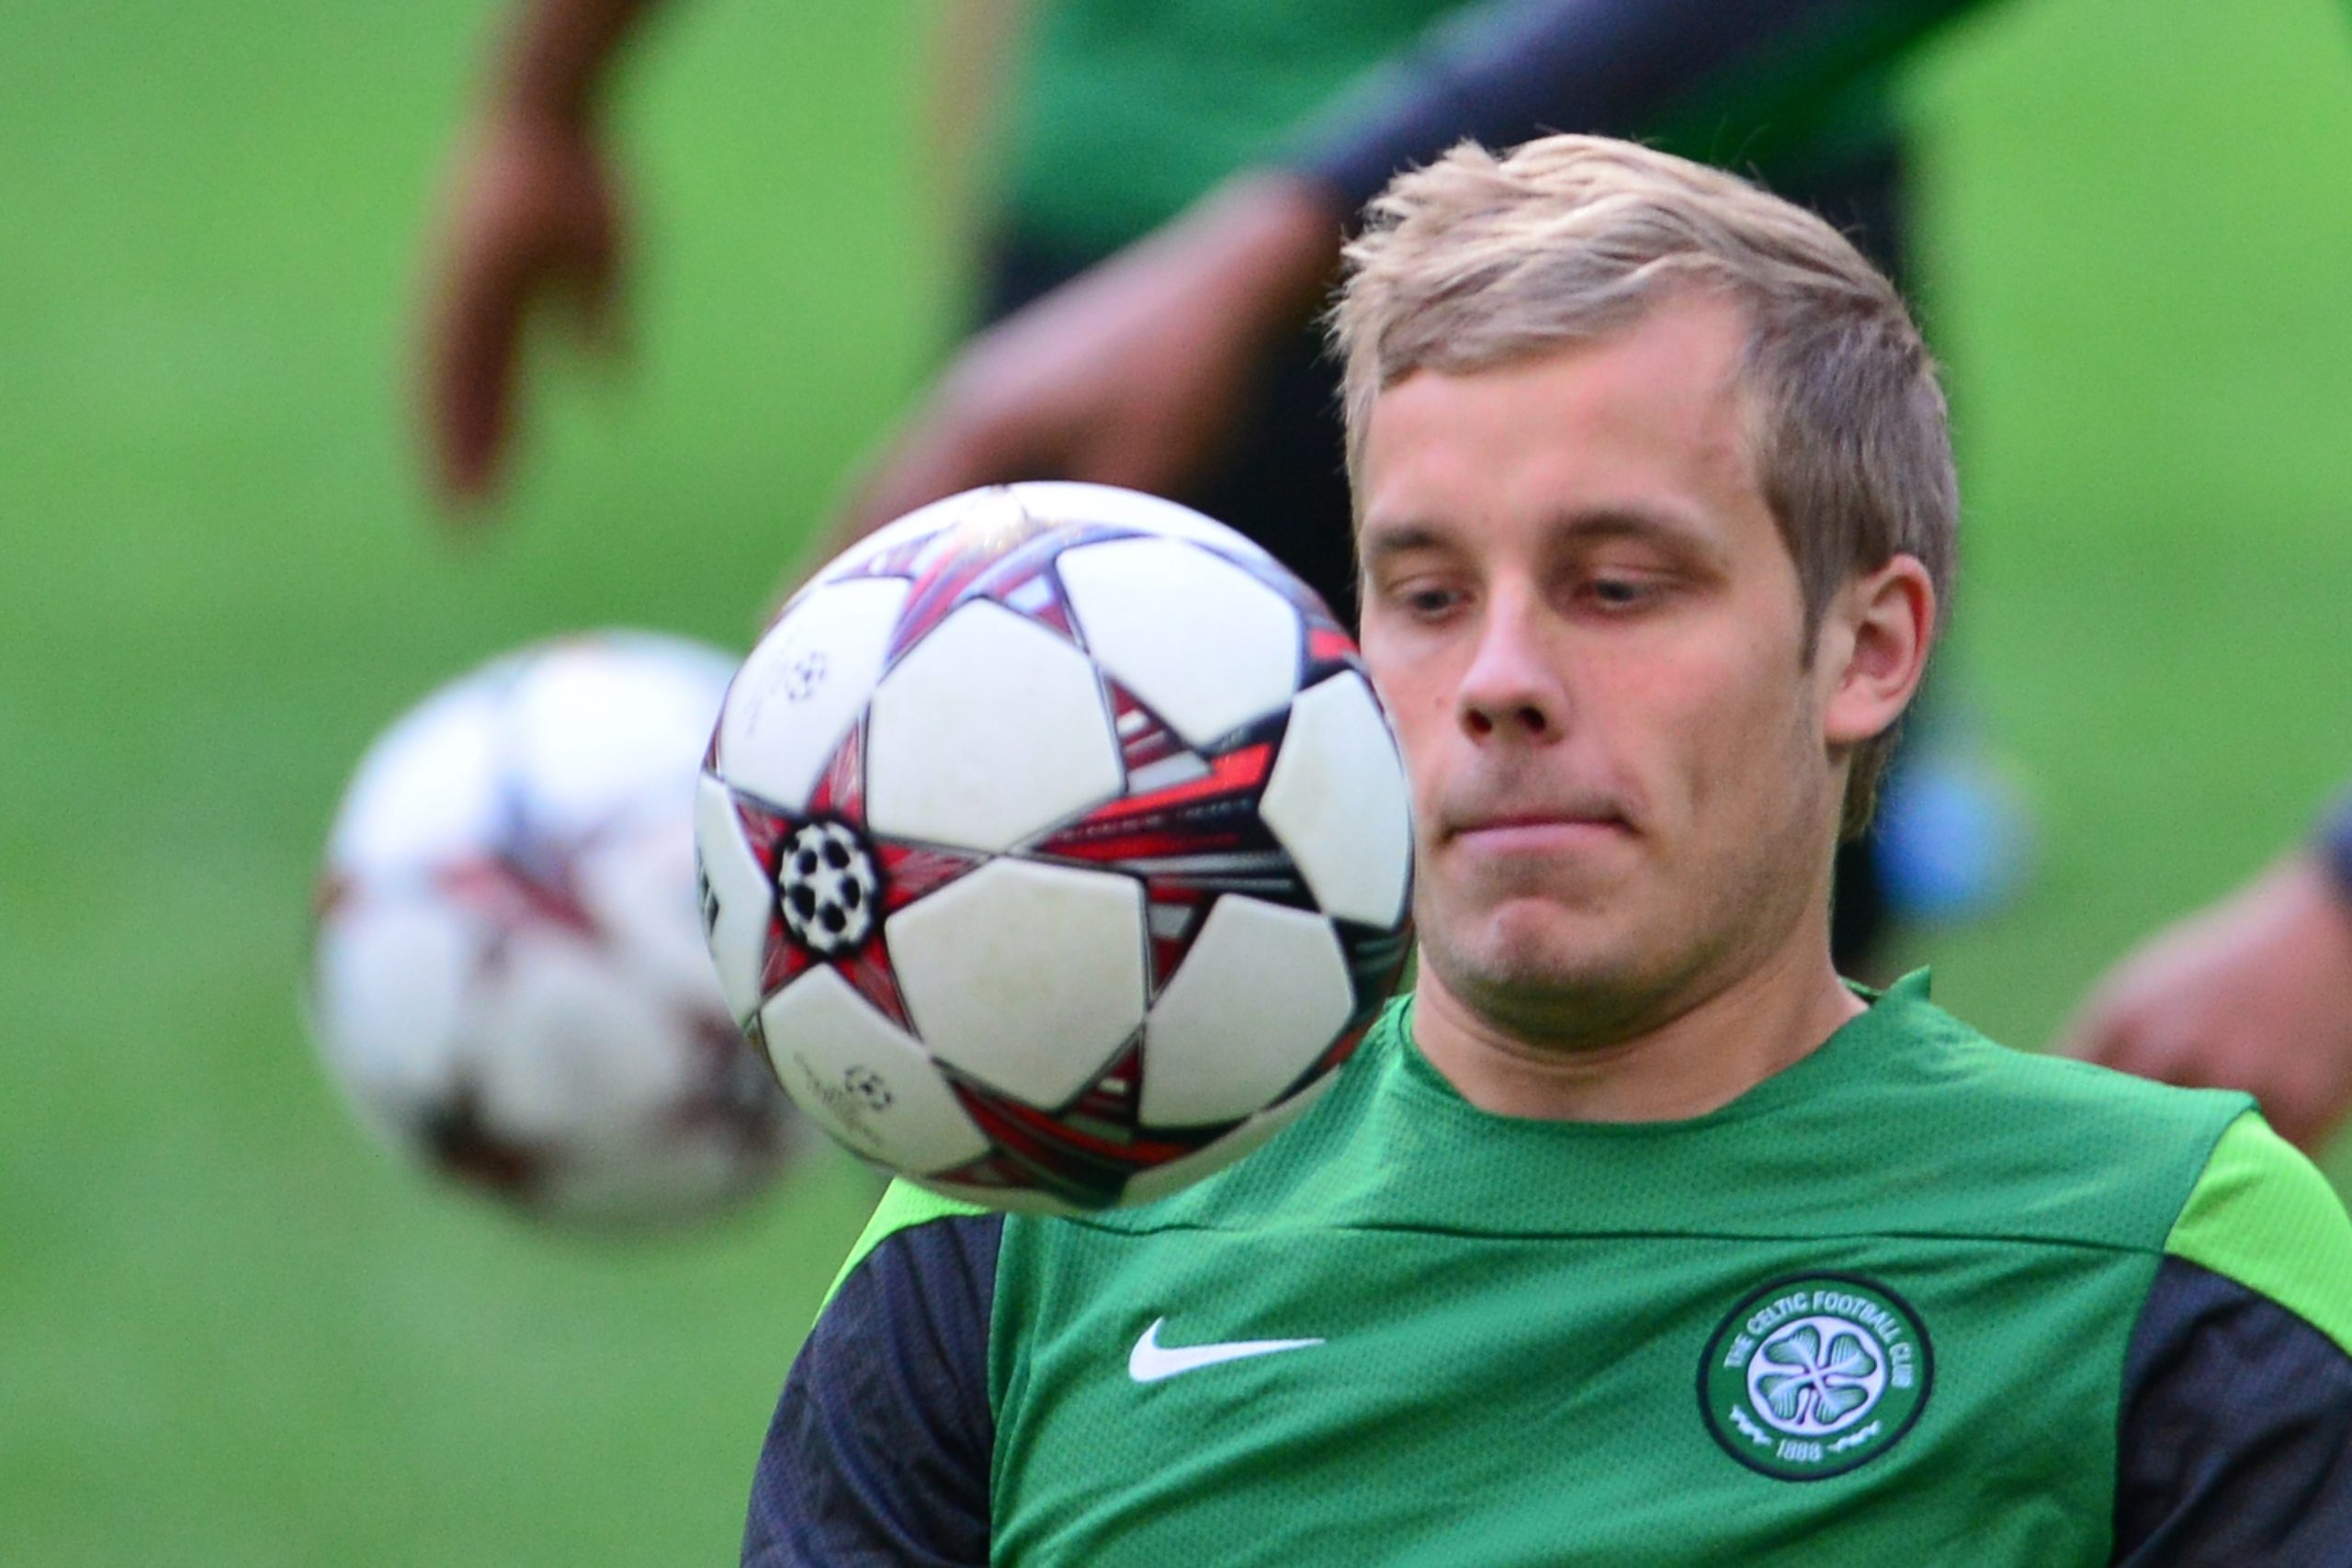 Celtic's Finn forward Teemu Pukki trains on September 17, 2013 at the San Siro Stadium in Milan on the eve of a Champions League Group H football match against AC Milan.